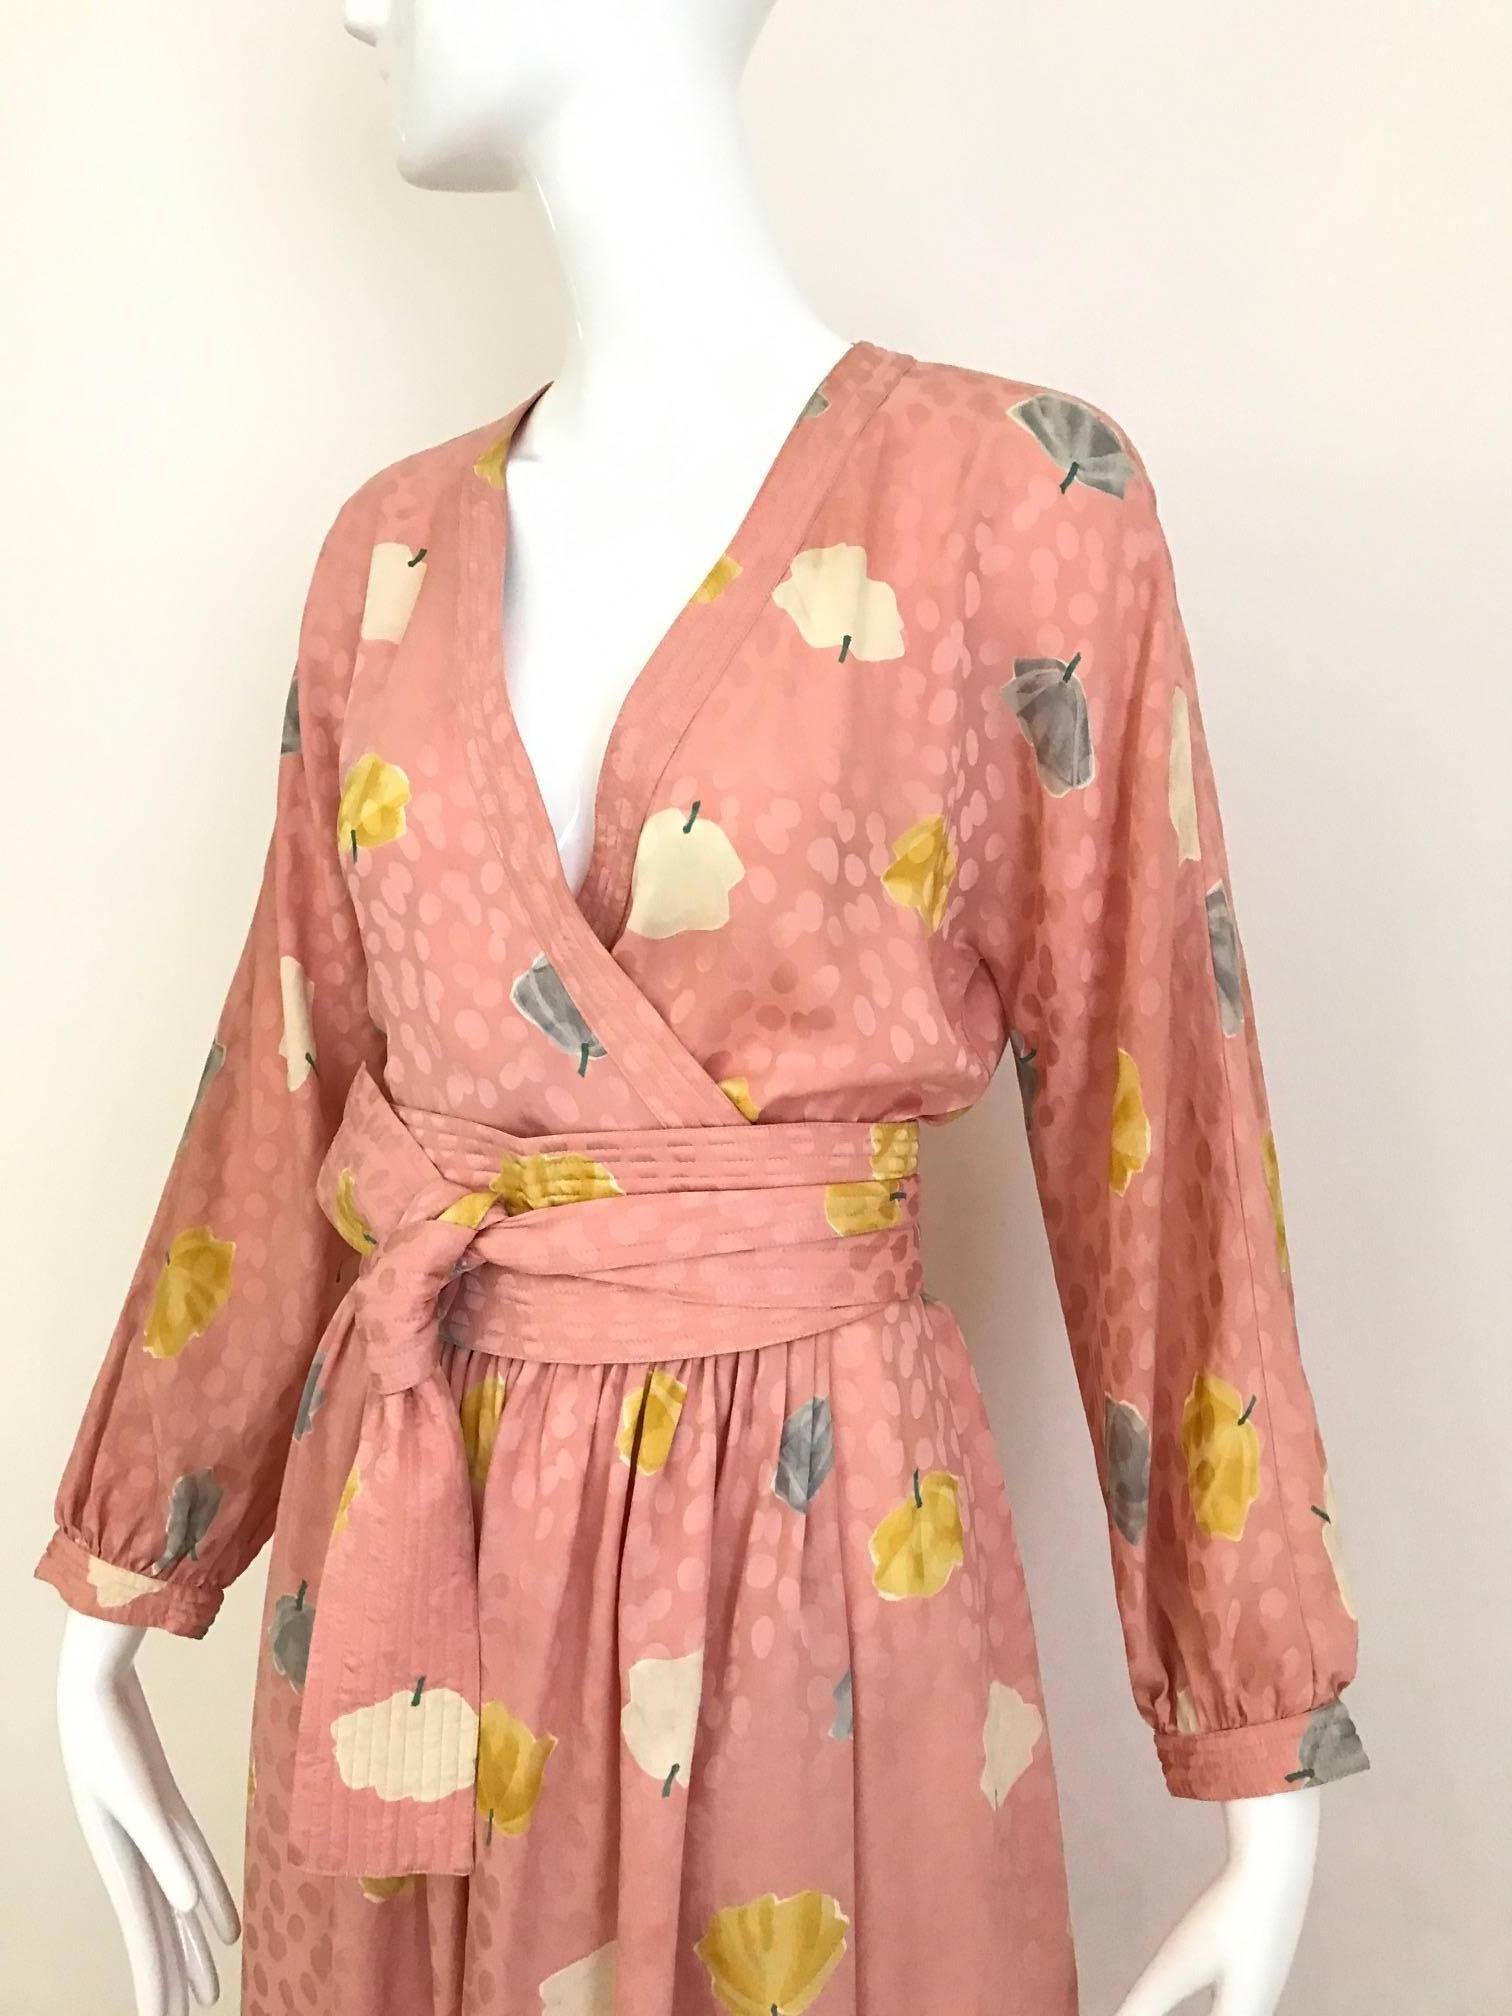 Chic Vintage Adele simpson light pink silk jacquard wrap dress with wide obi style belt. Dress has Ginkgo leaves print in yellow, grey and white. 
Measurement: 
Bust 34 inch  / Waist: 24 inch to  25 inch ( hook an eye can be moved)
Hip 44 inch /